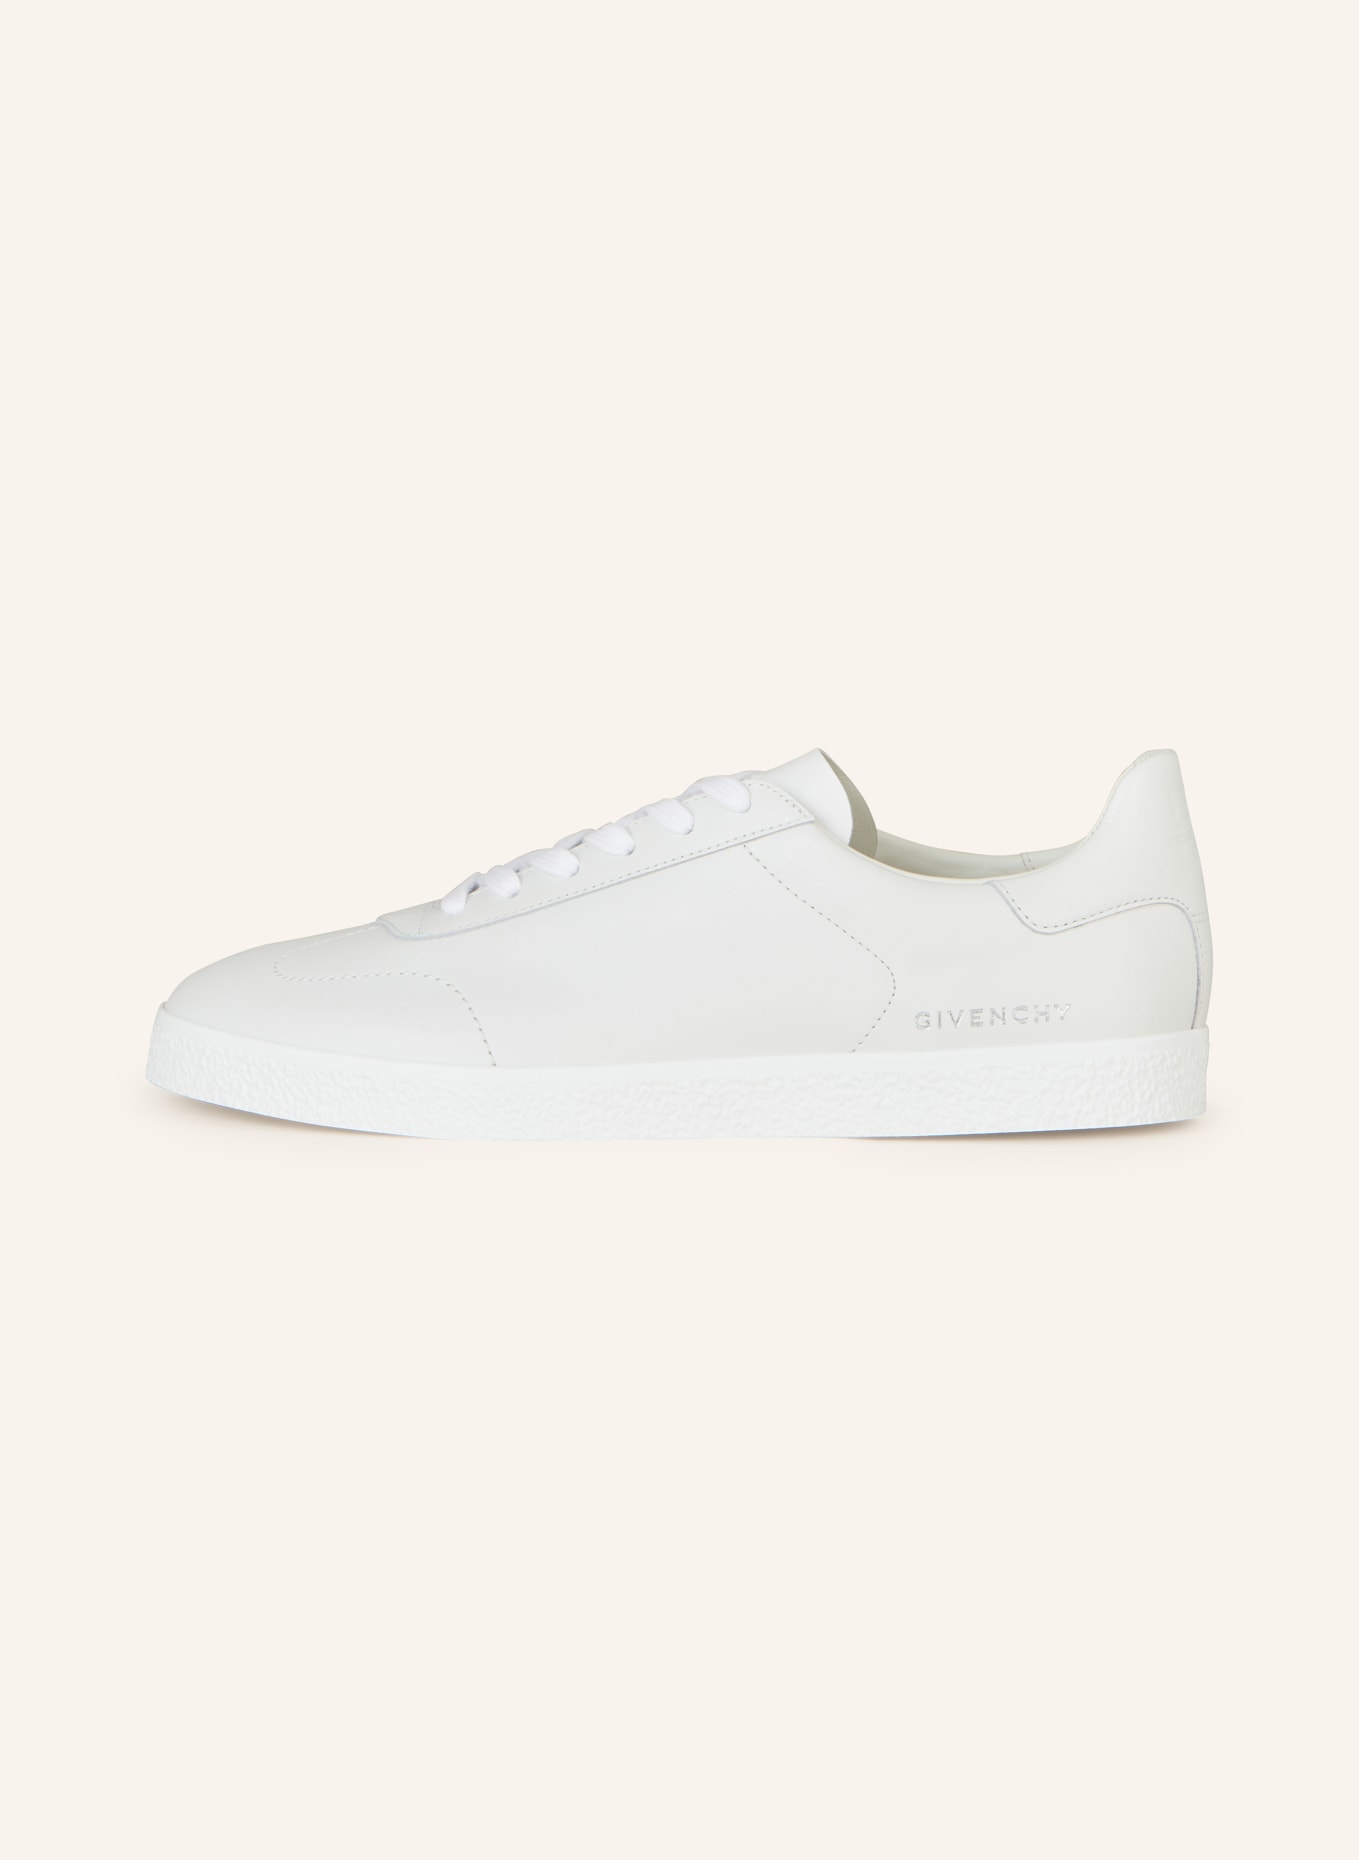 GIVENCHY Sneaker TOWN, Farbe: WEISS (Bild 4)